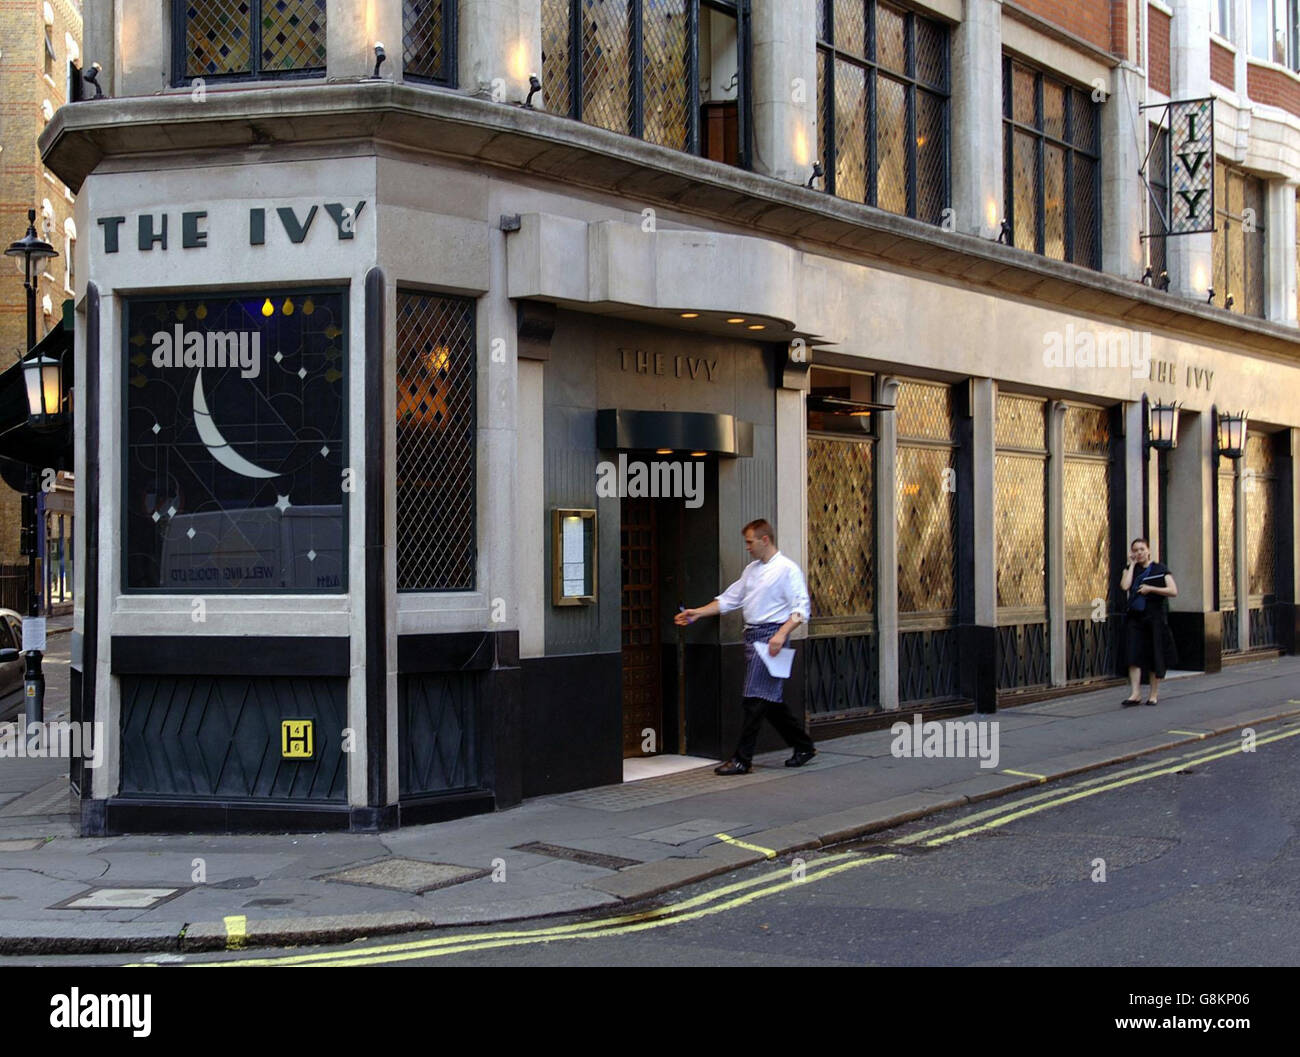 A general view of The Ivy restaurant in London's West End, Tuesday August 30, 2005. The celebrity hangout has been usurped by south London's Chez Bruce as the city's favourite restaurant according to Harden's London Restaurant Guide. See PA story CONSUMER Restaurants. PRESS ASSOCIATION Photo. Photo credit should read: Matthew Fearn/PA Stock Photo